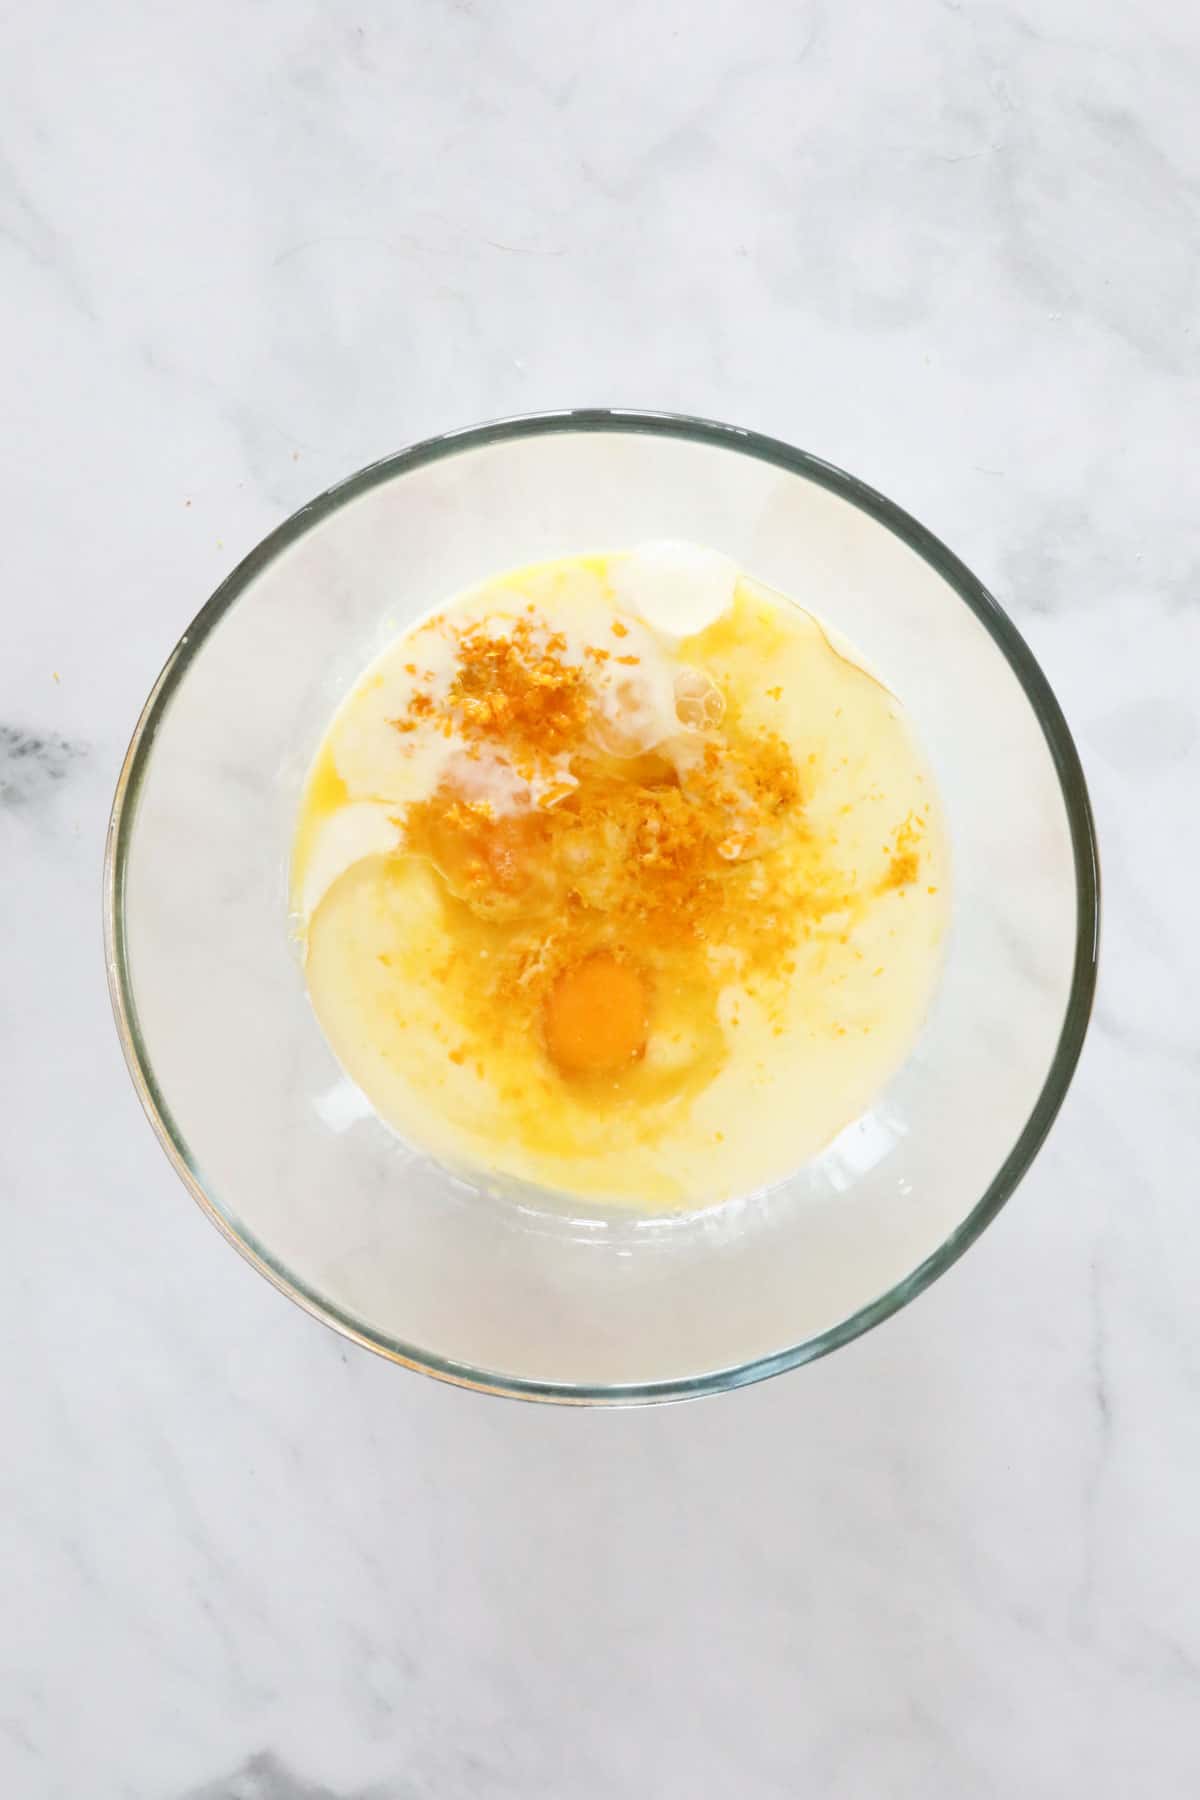 Wet ingredients - oil, buttermilk, zest, juice and eggs in a glass bowl.